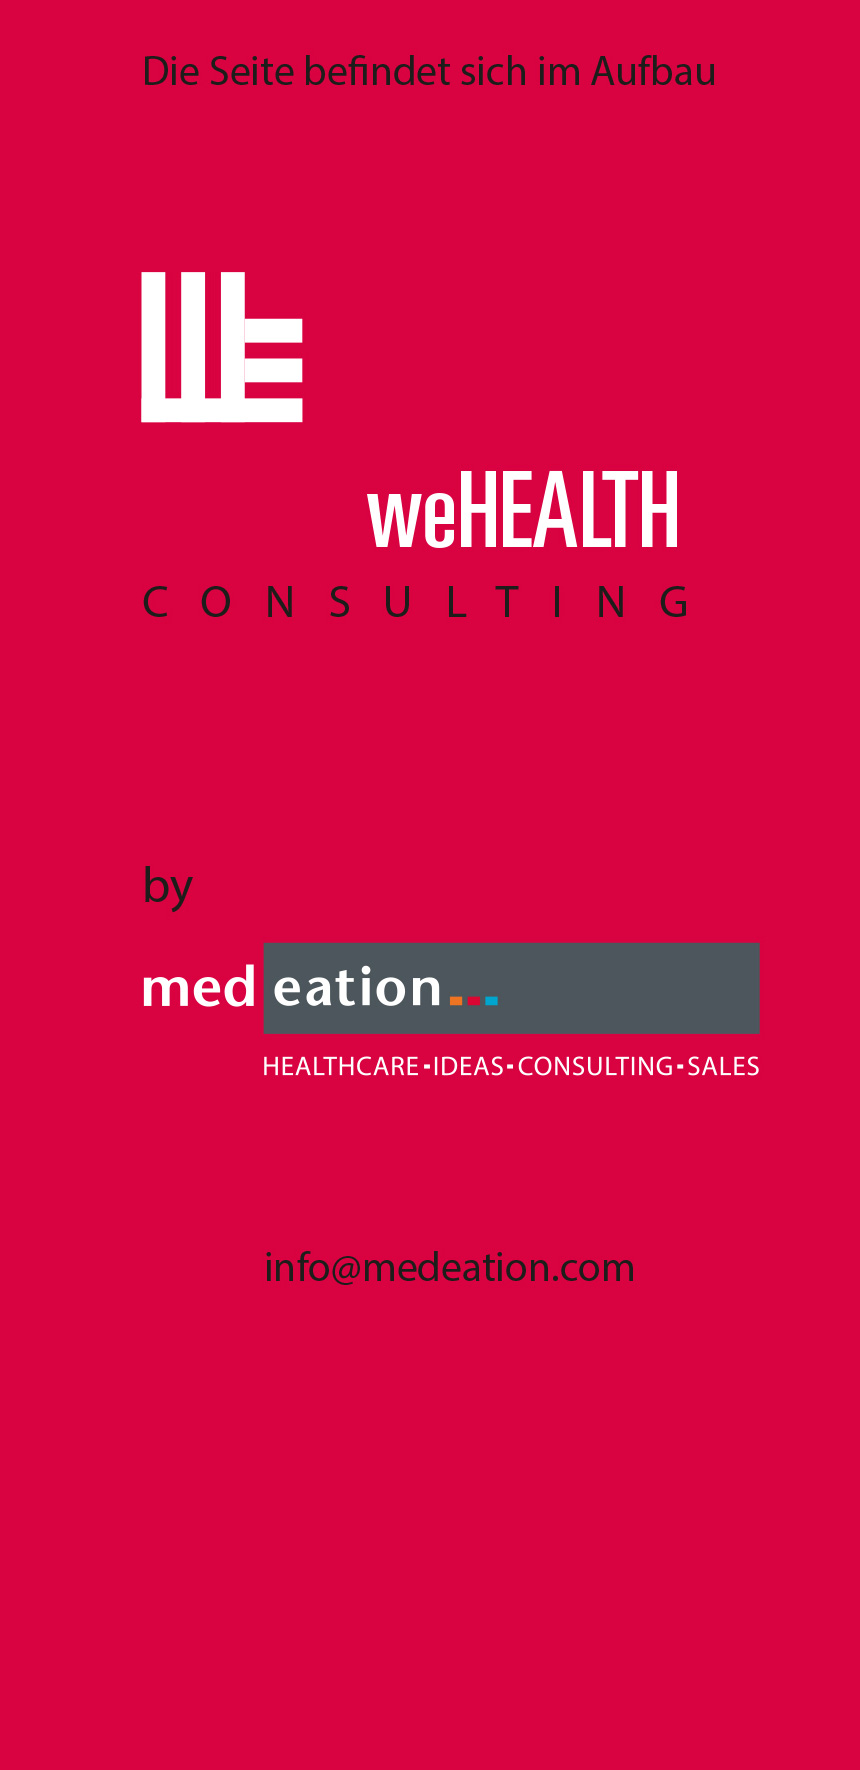 WEHEALTH CONSULTING by medeation | HEALTHCARE-IDEAS-CONSULTING-SALES